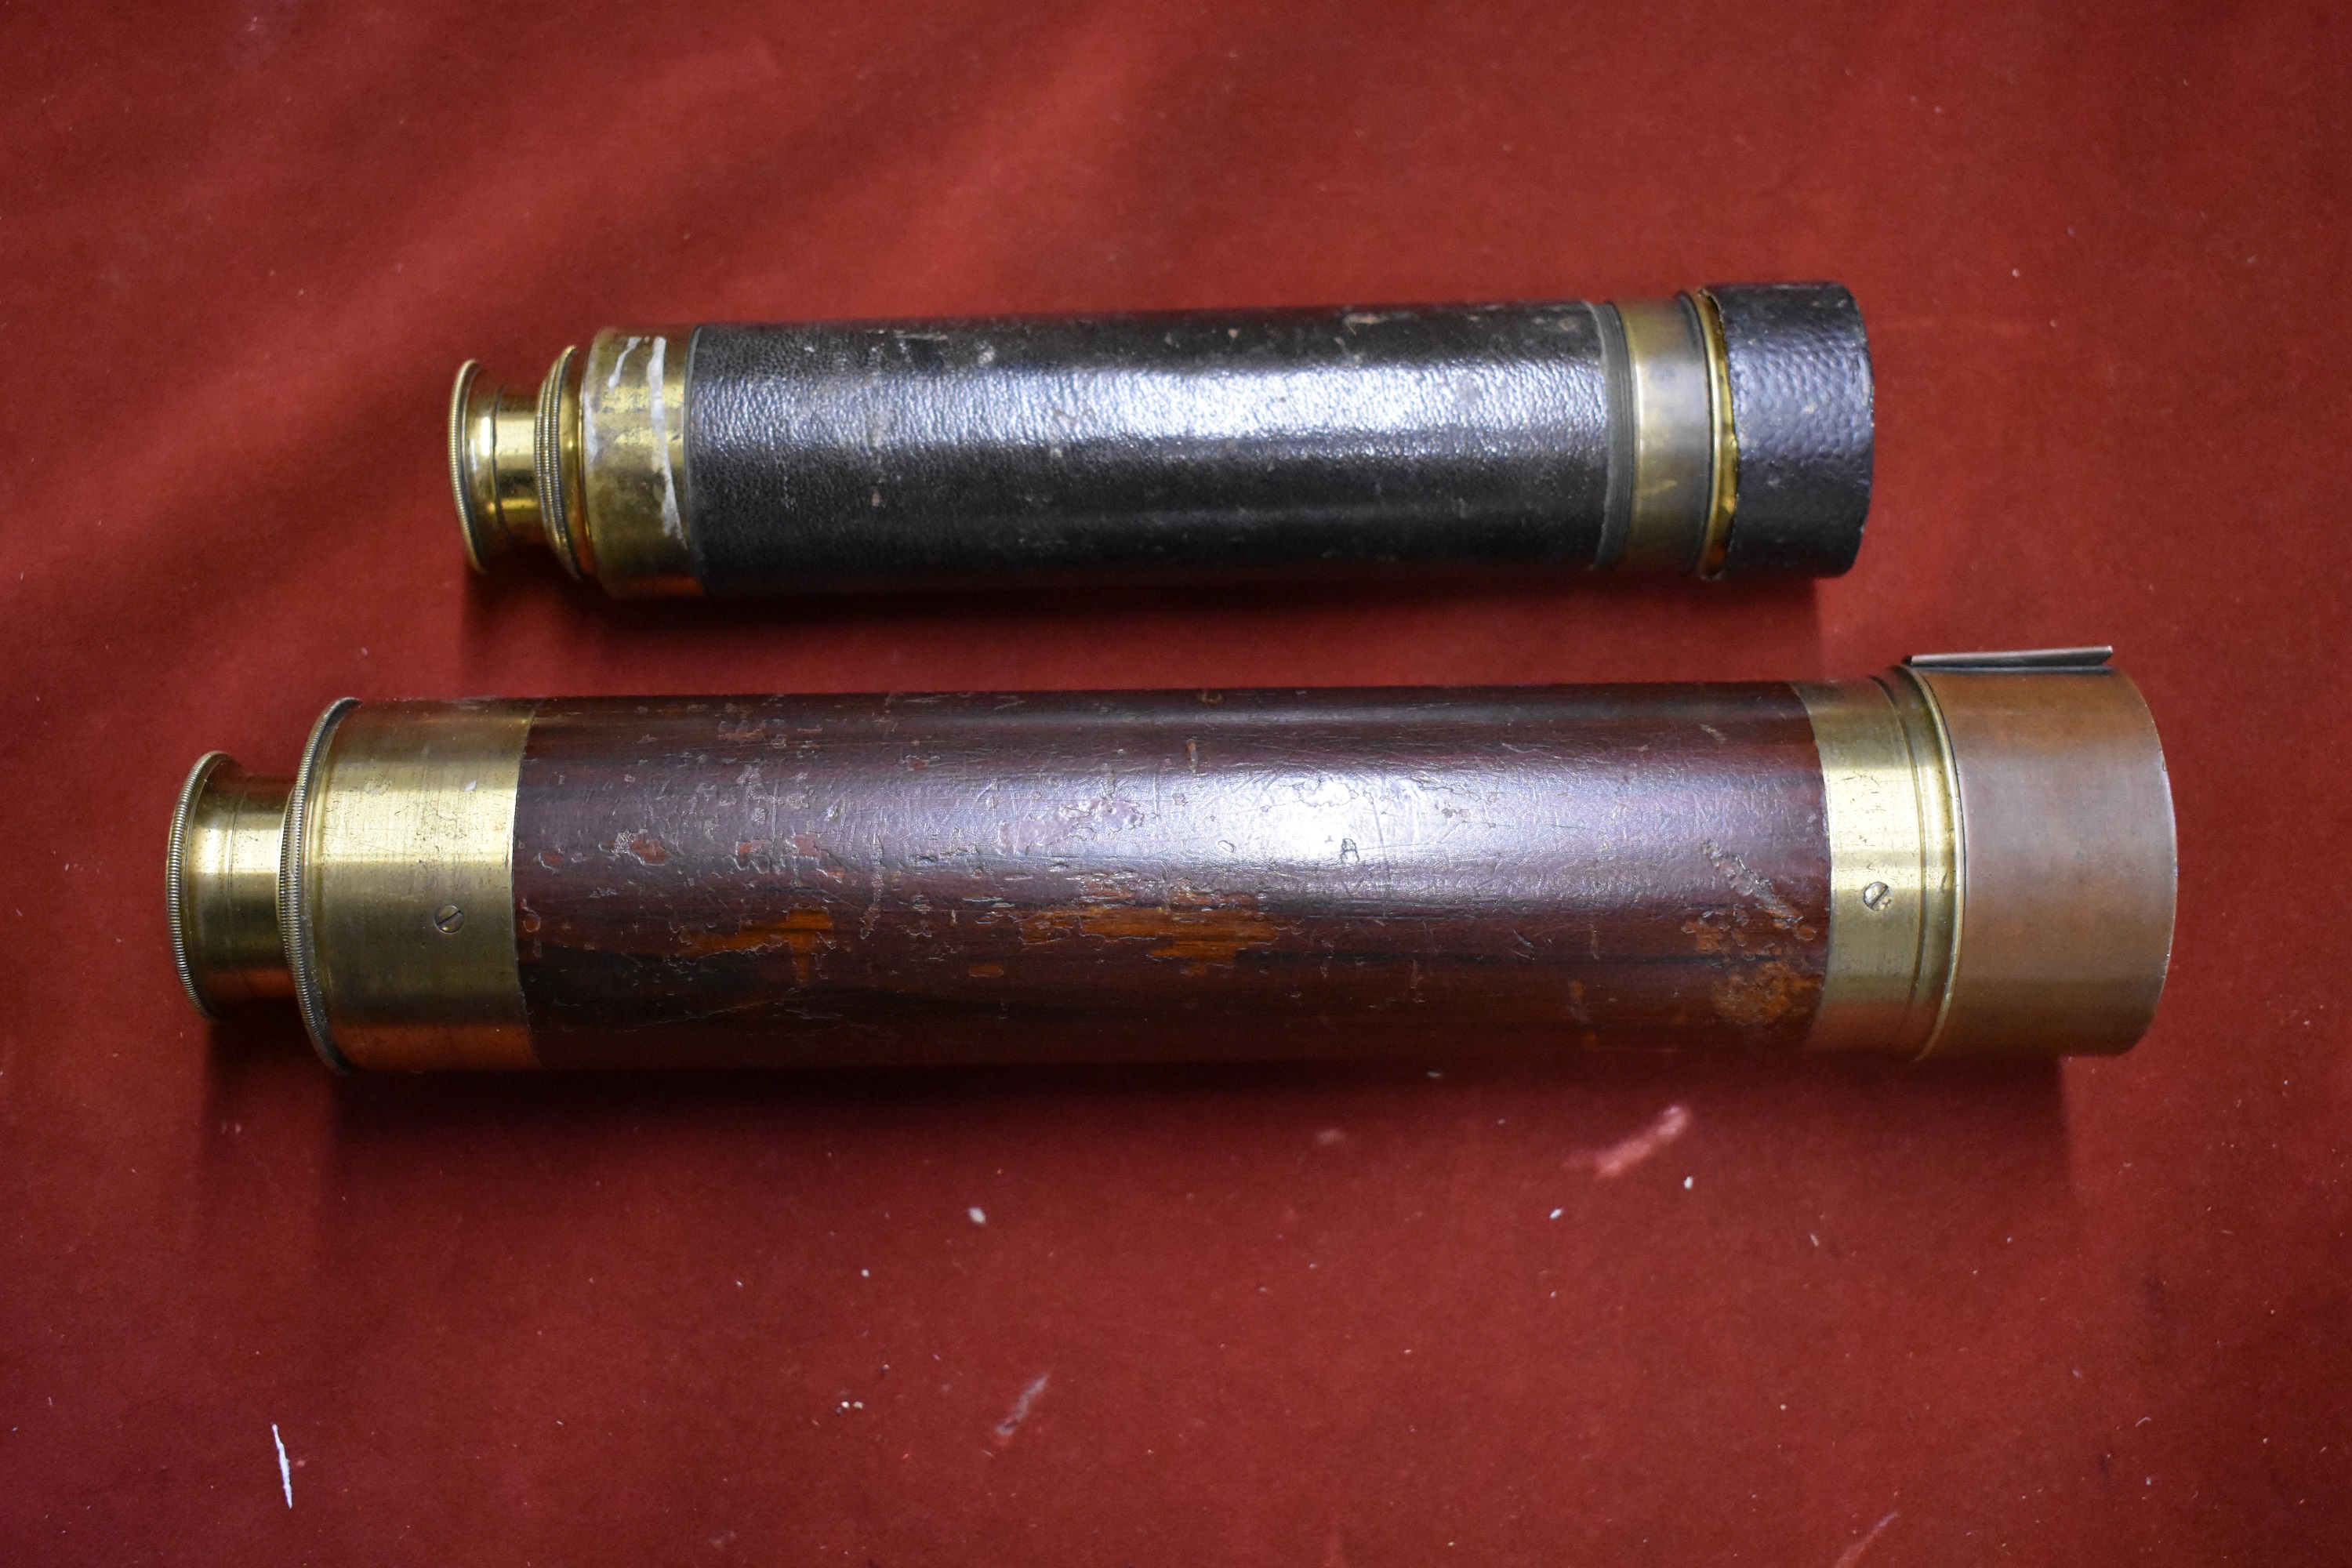 British Military/Nautical 19th century mahogany cased and brass mounted telescopes (2). One is a